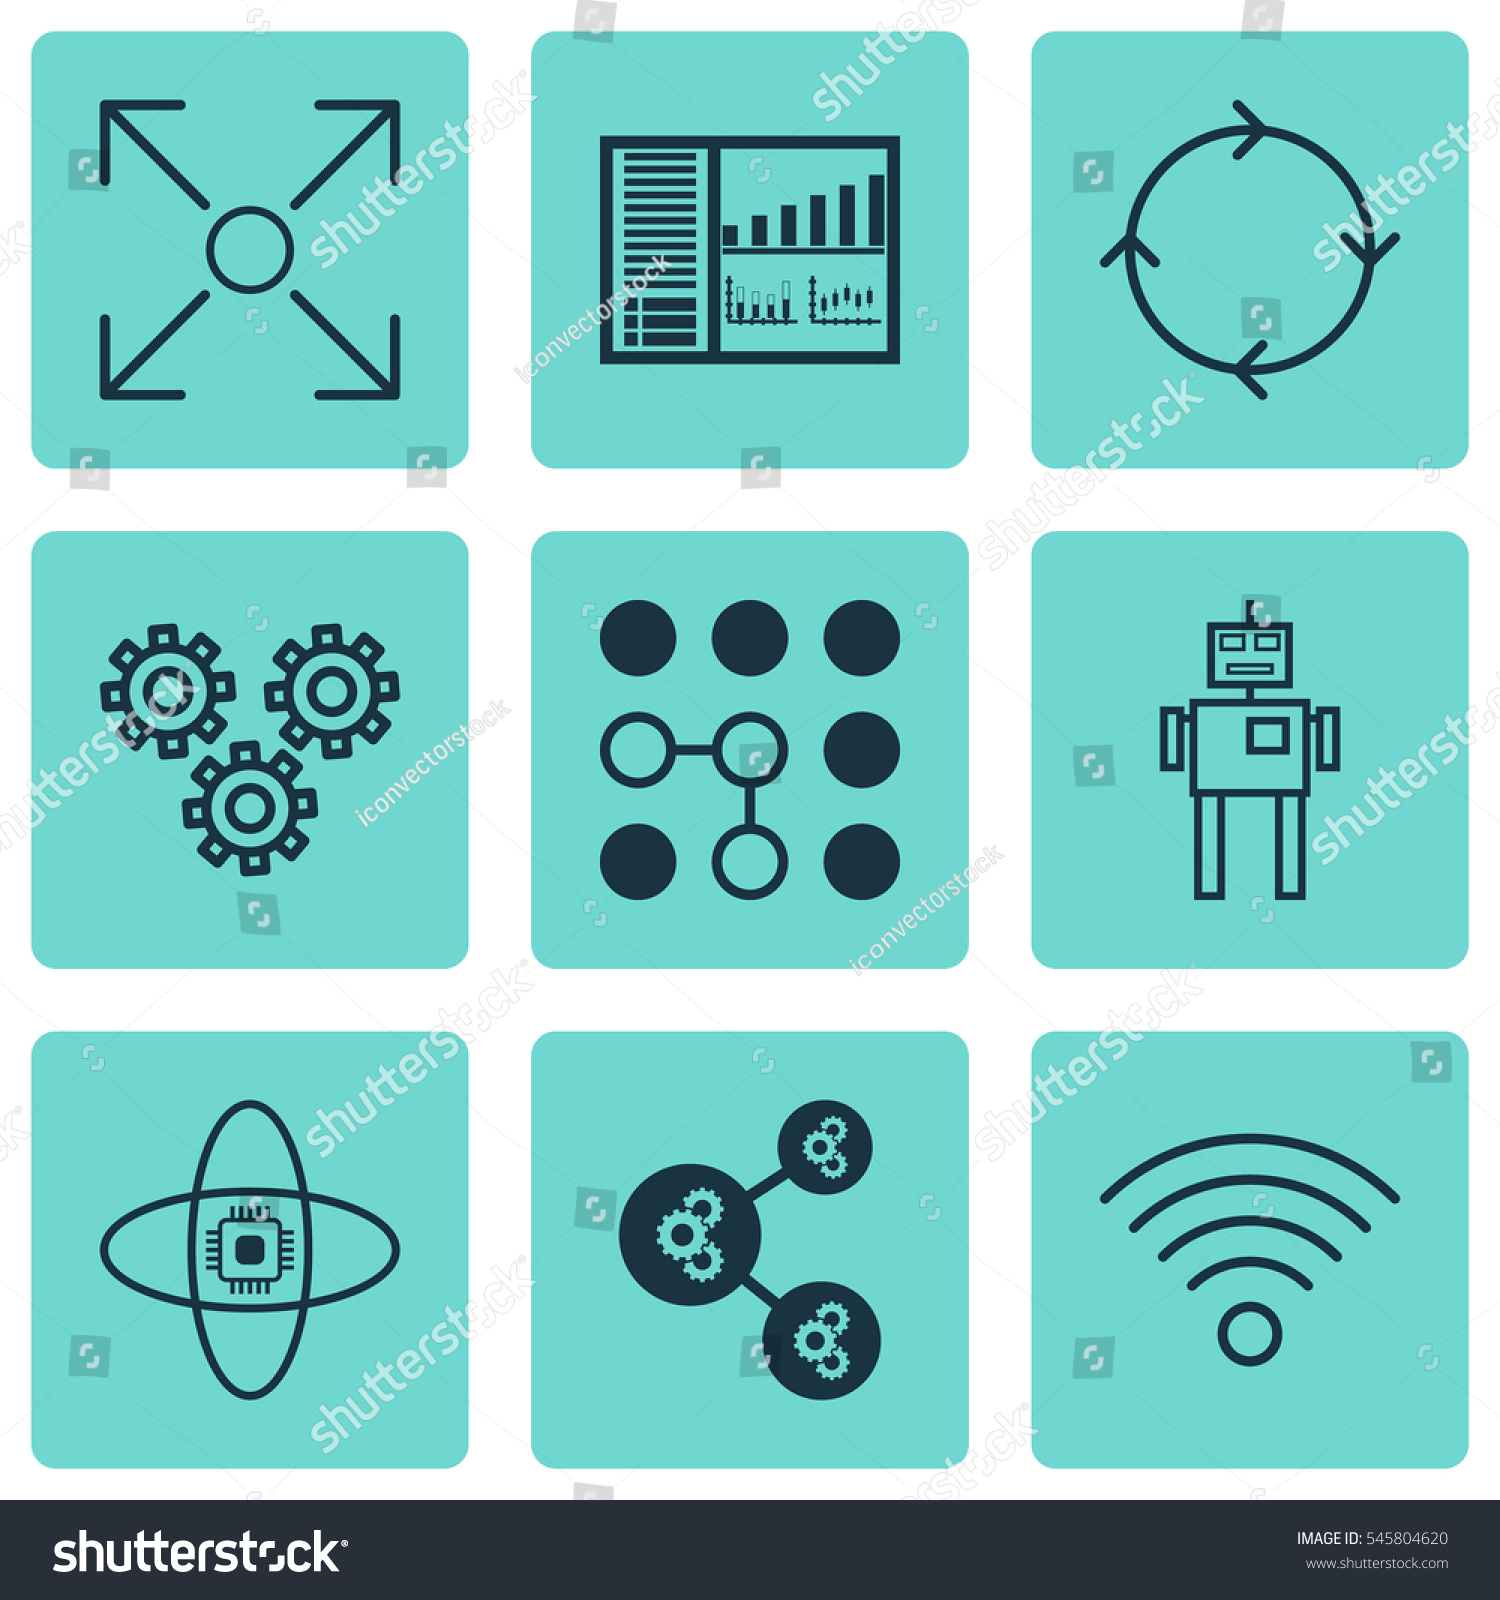 Set 9 Machine Learning Icons Includes Stock Vector 545804620 - Shutterstock